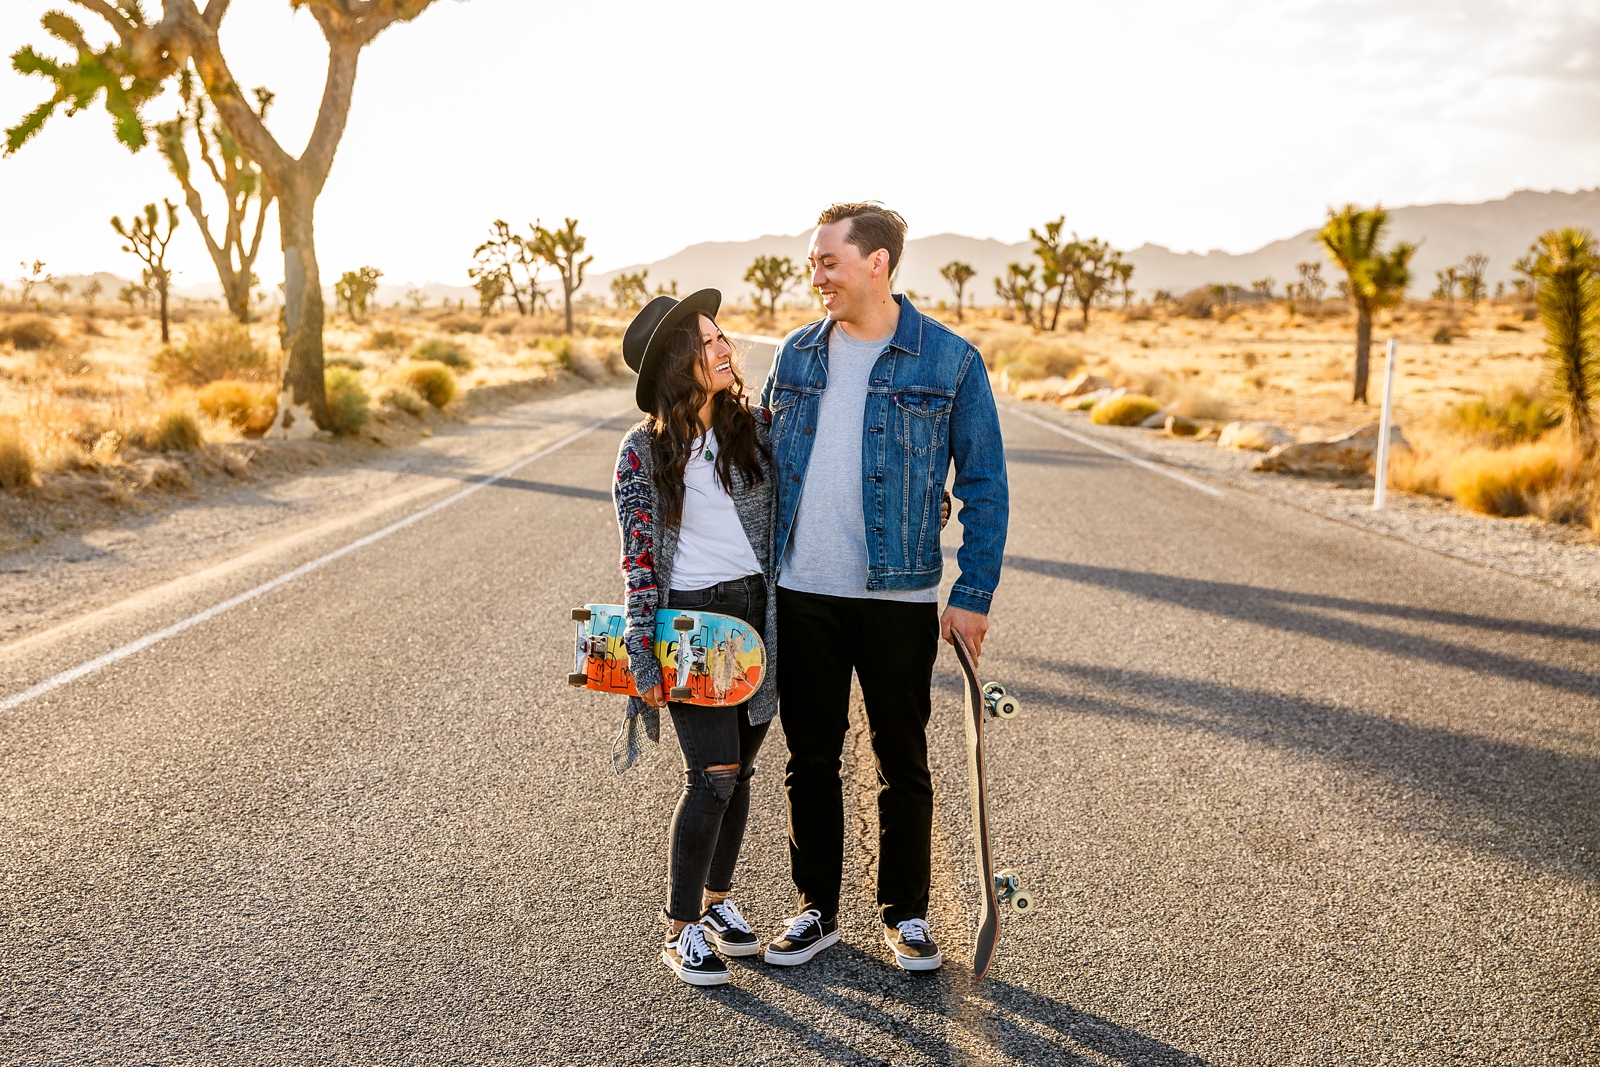 This skateboarding couple got engaged in Joshua Tree NP at sunset.